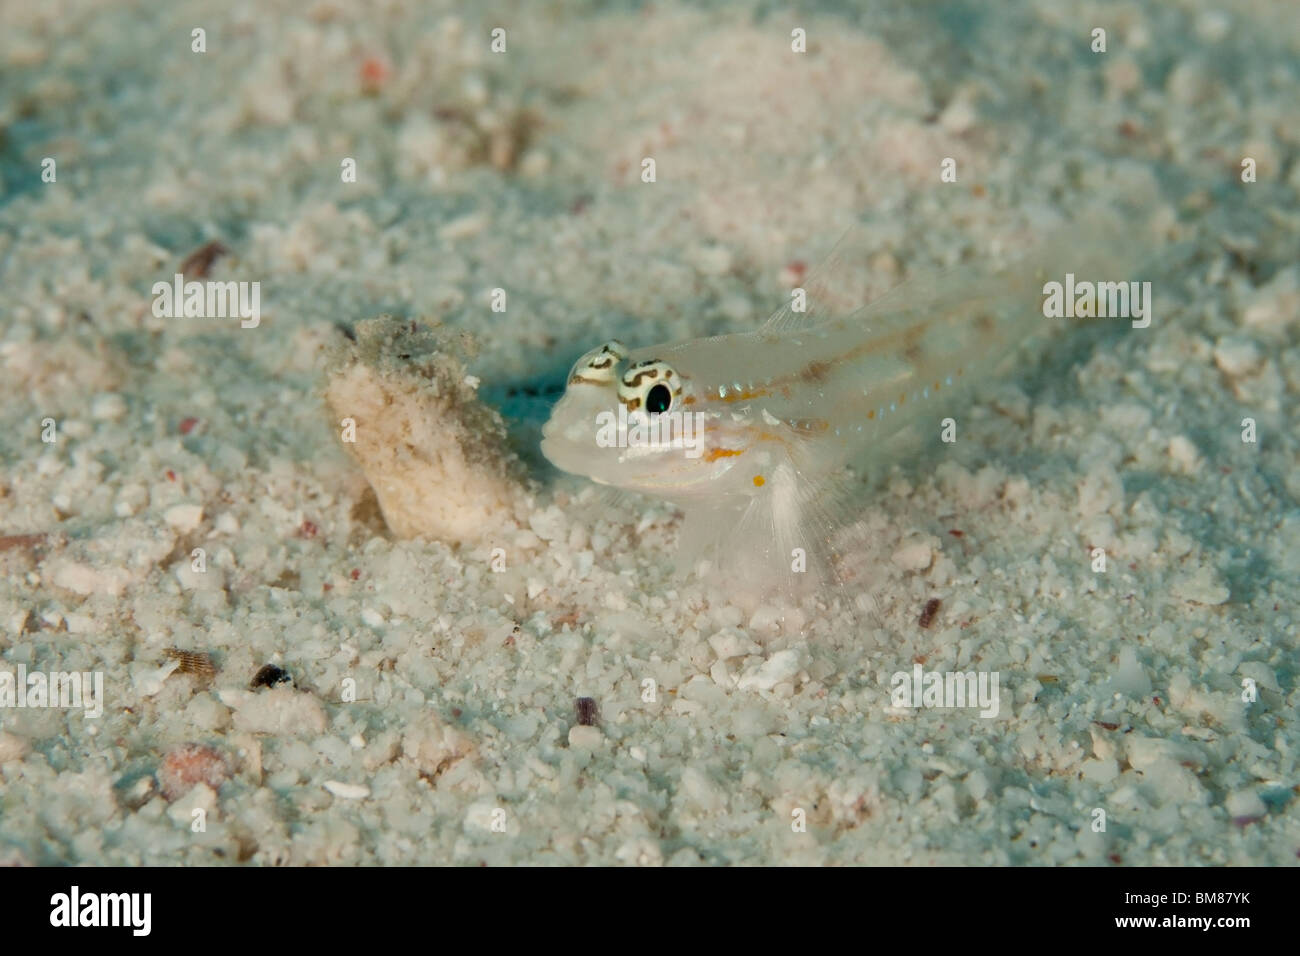 Bridled Goby (Coryphopterus glaucofraenum) resting on a sandy ocean bottom in Bonaire, Netherlands Antilles. Stock Photo